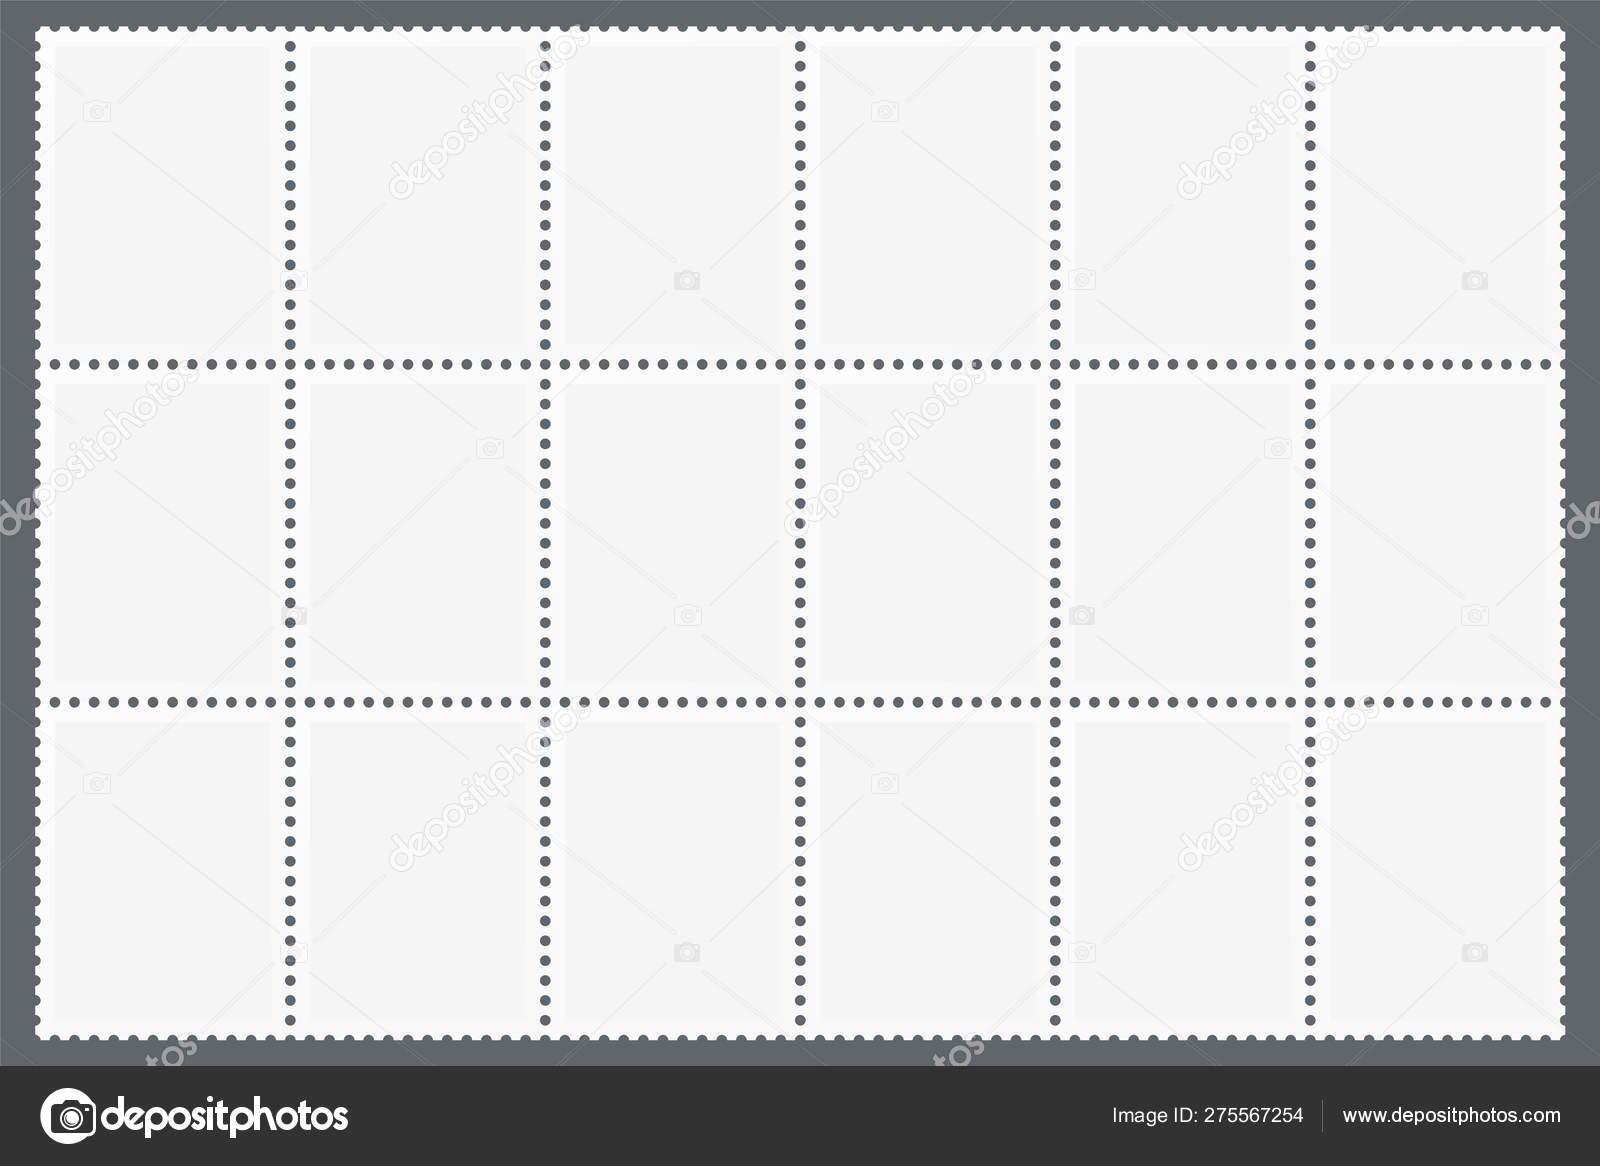 Perforated sheet of postage stamps . Blank marks template for In Blank Pattern Block Templates